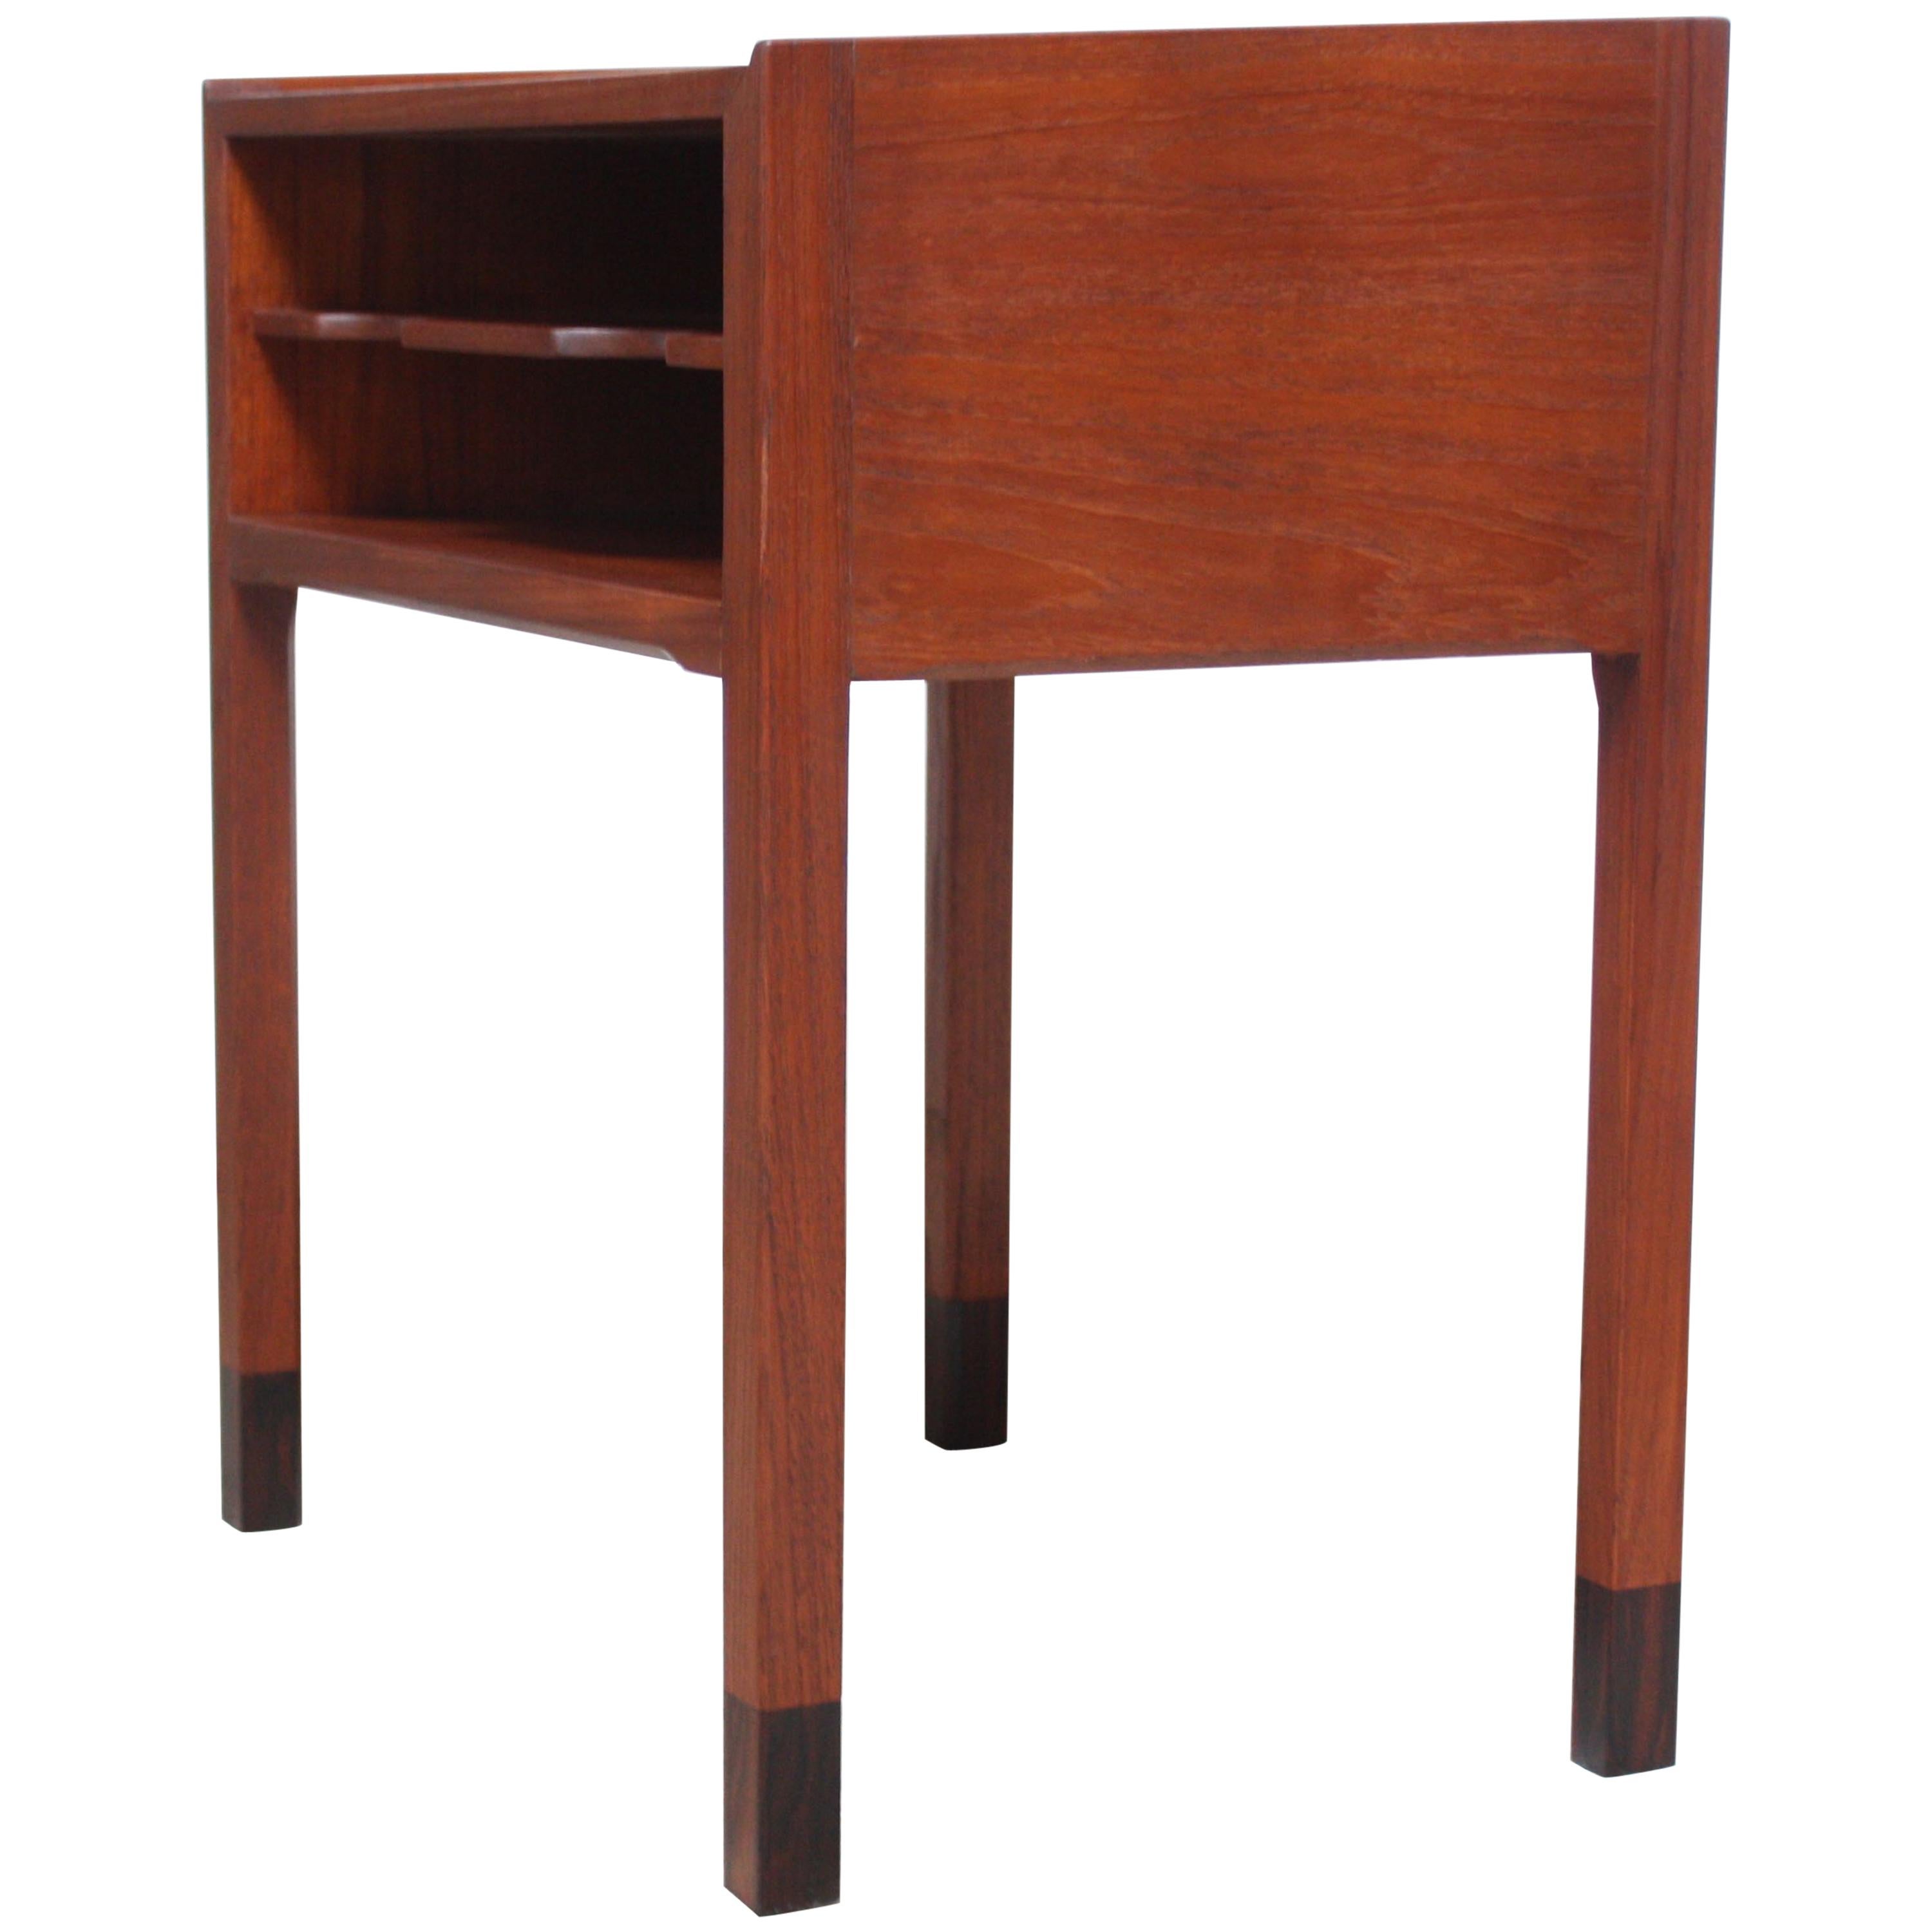 Danish Teak and Rosewood Side Table Designed for the Rigspolitiet Headquarters For Sale